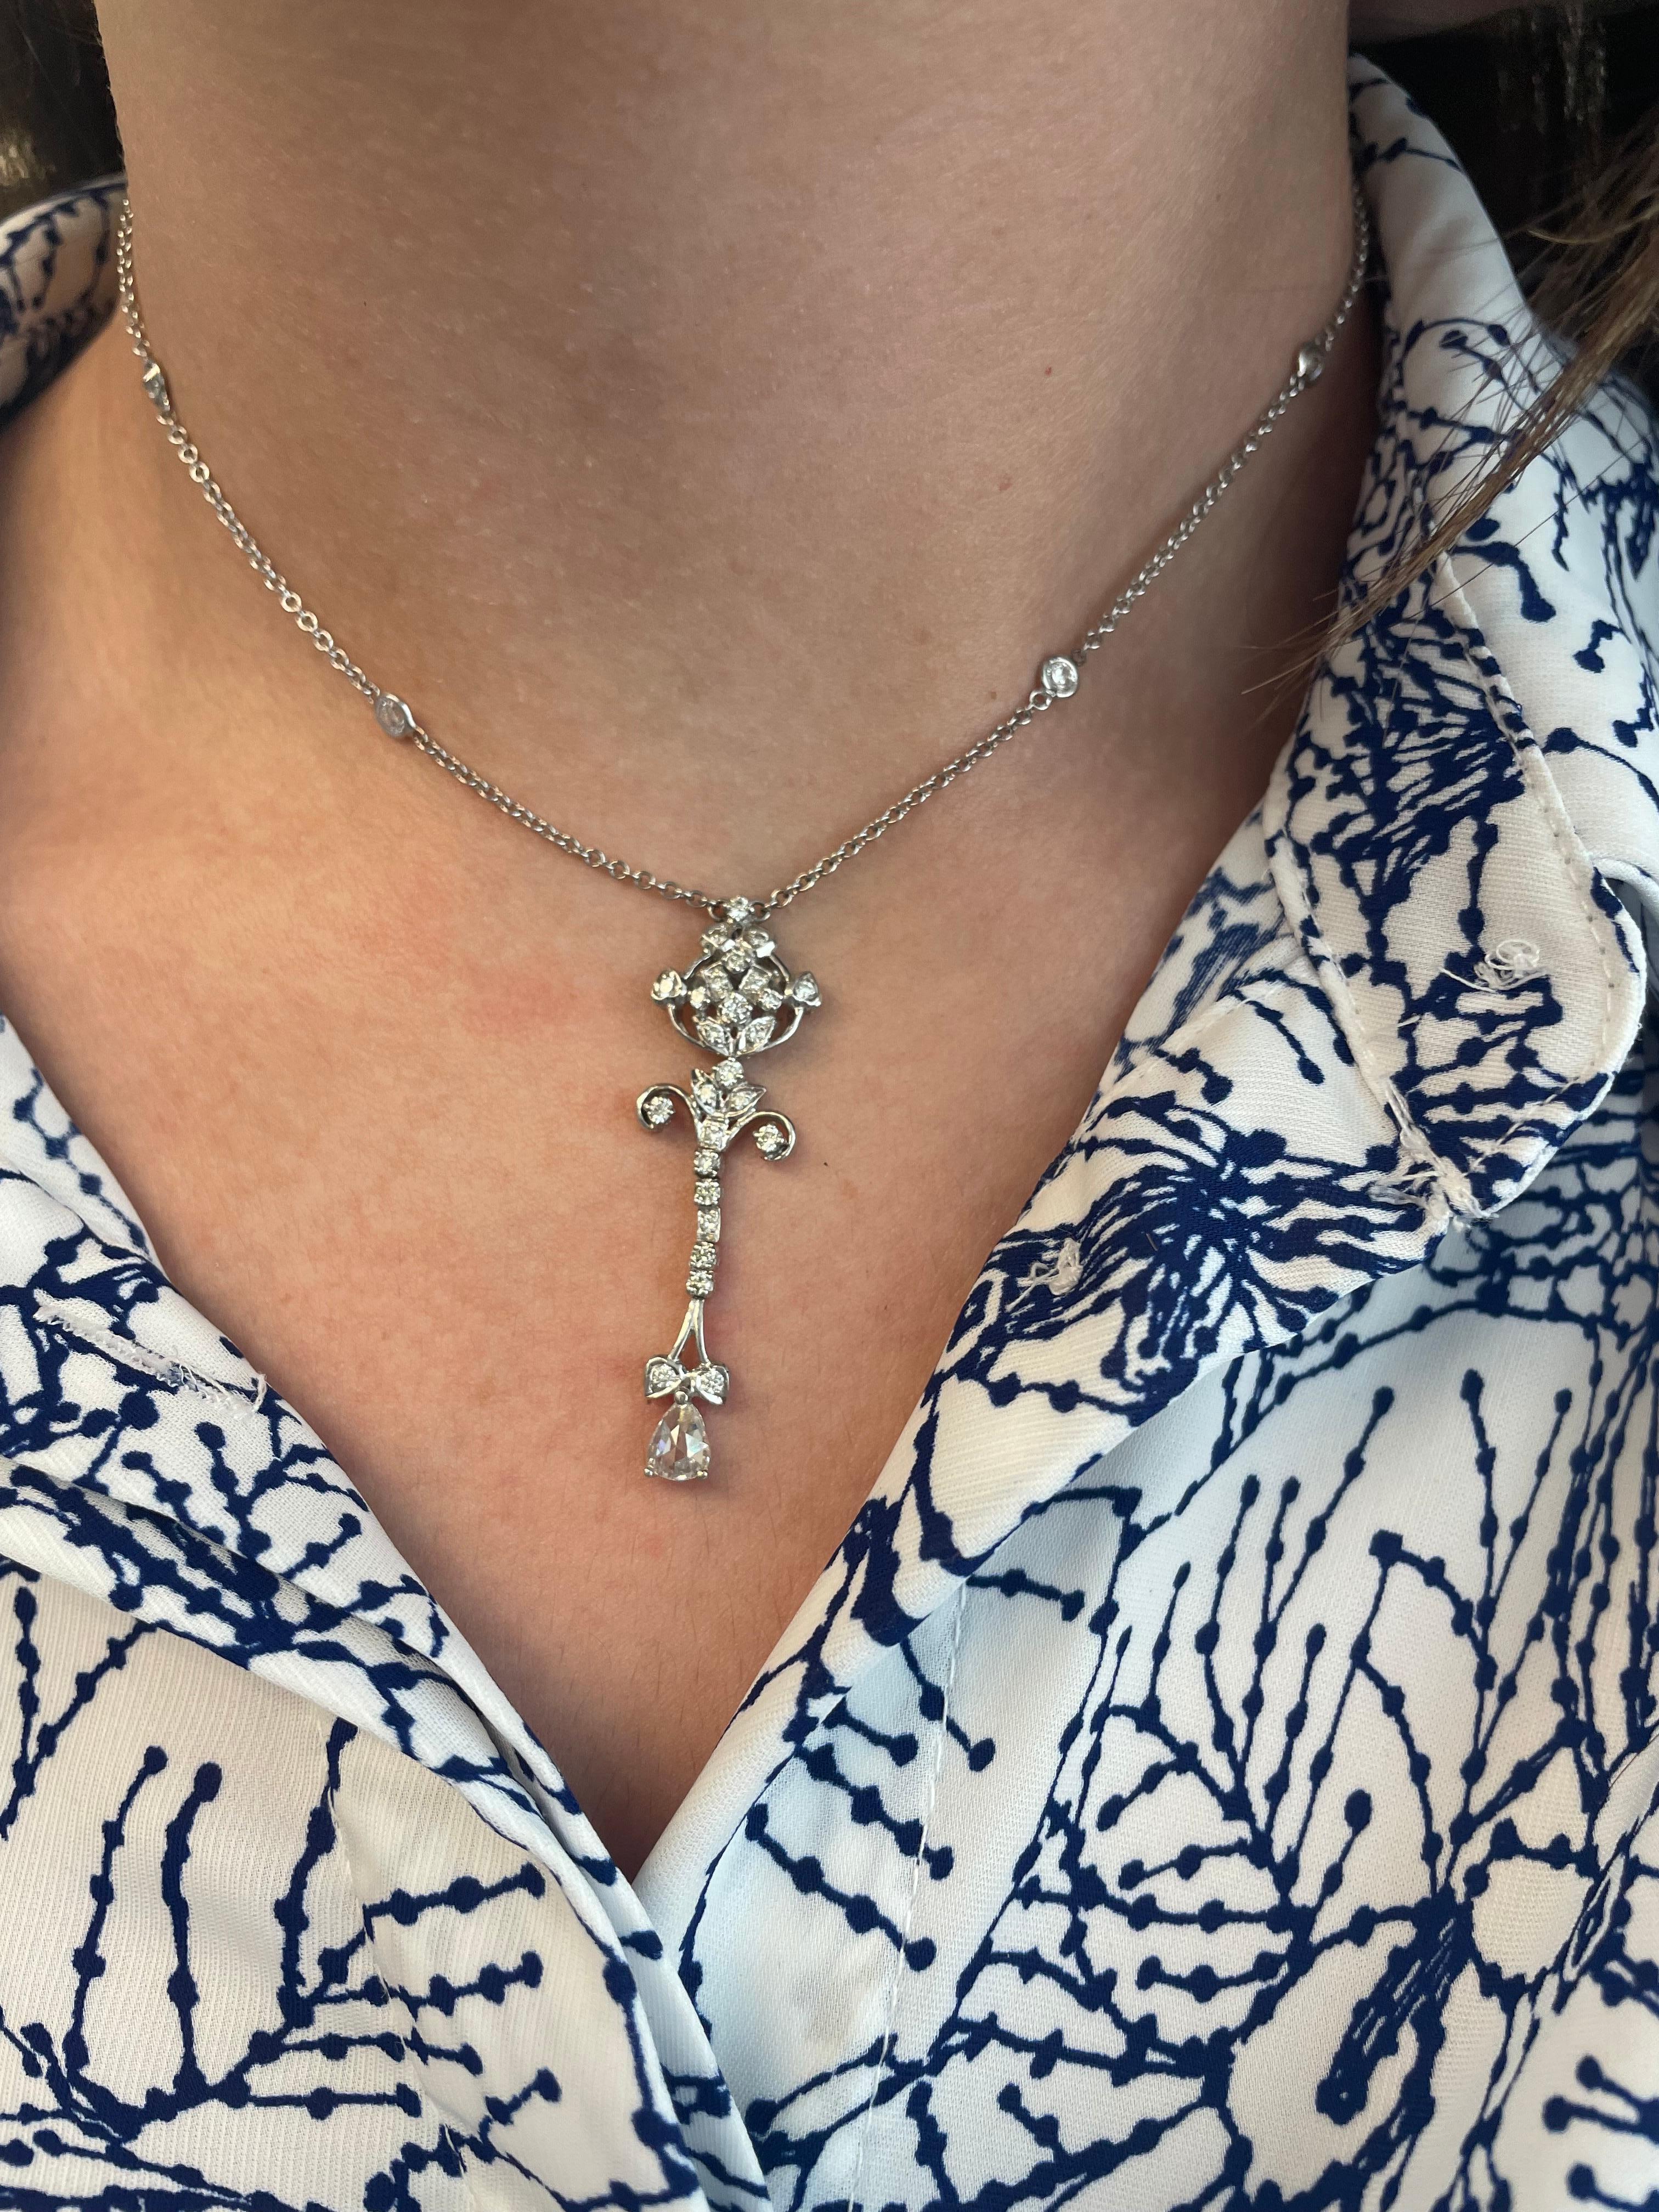 Art Deco inspired diamond drop necklace.
1.97 carats of pear and round diamonds, approximately H/I color and SI clarity. 18-karat white gold.
Accommodated with an up to date appraisal by a GIA G.G. upon request. please contact us with any